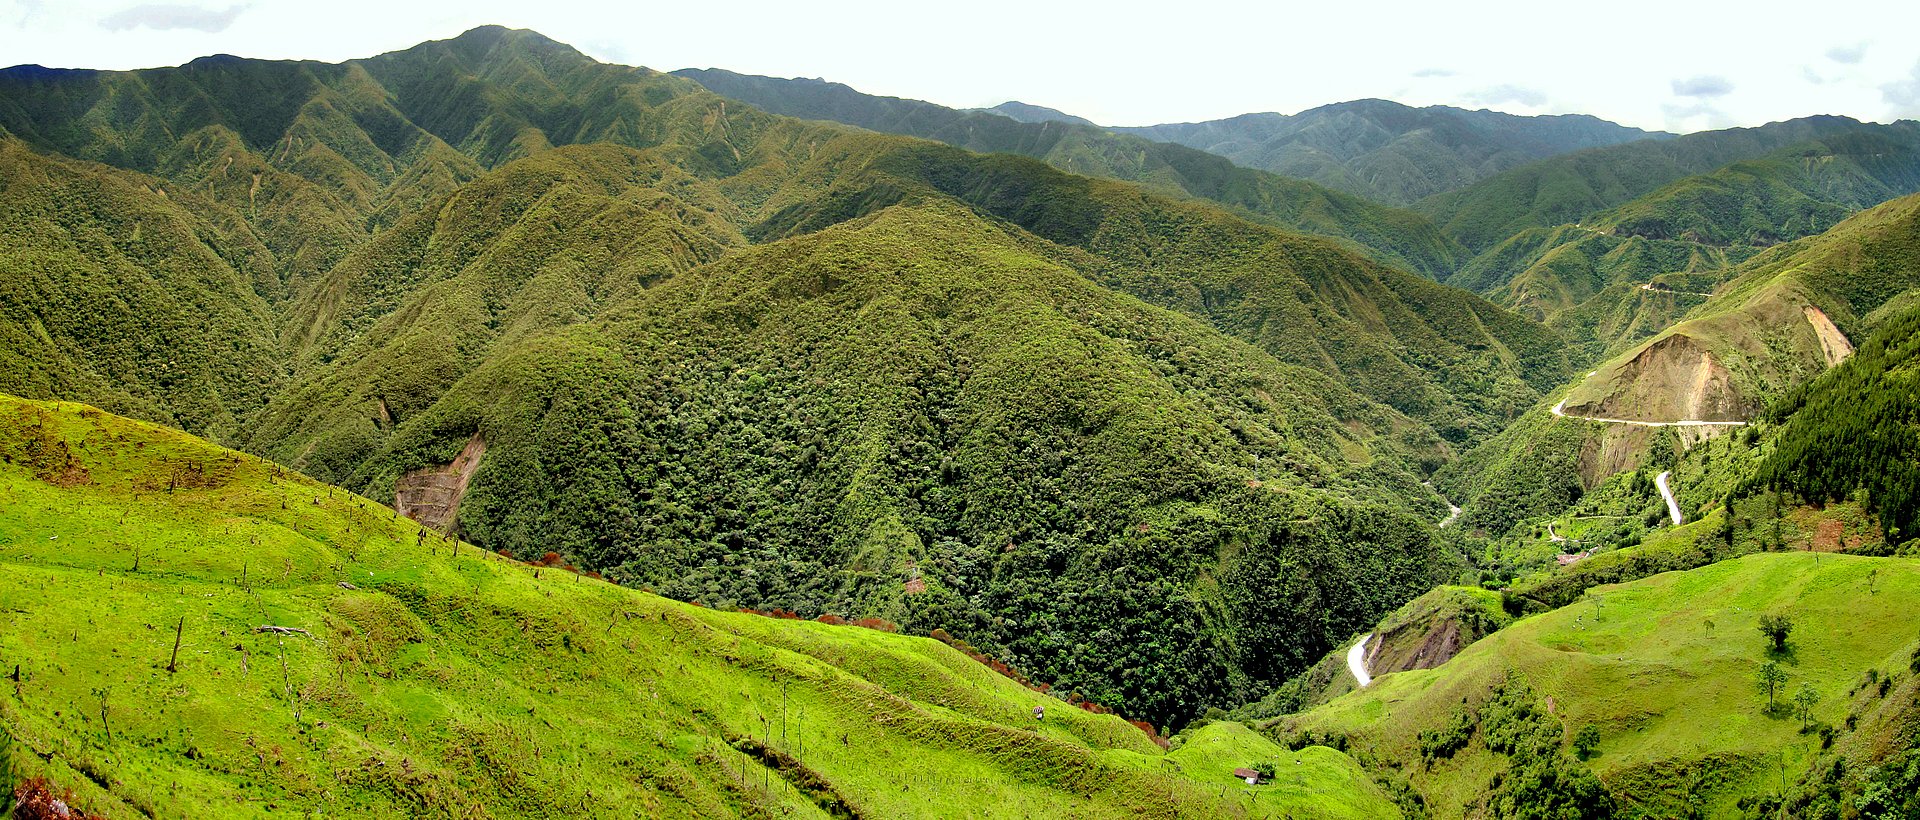 Researchers present new aspects of land use for Ecuador.